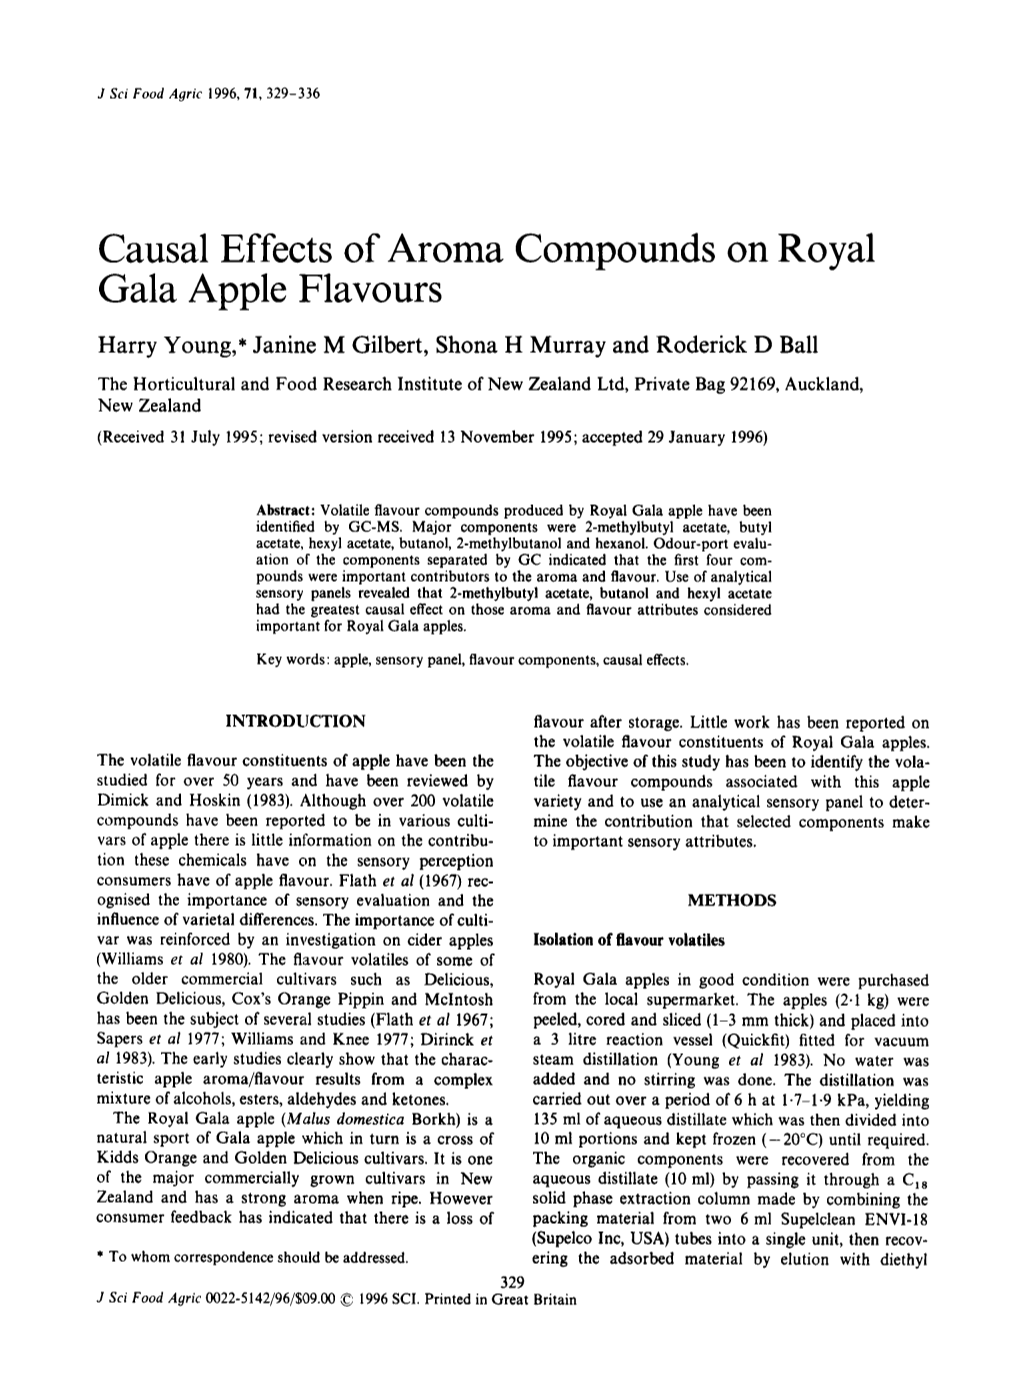 Causal Effects of Aroma Compounds on Royal Gala Apple Flavours